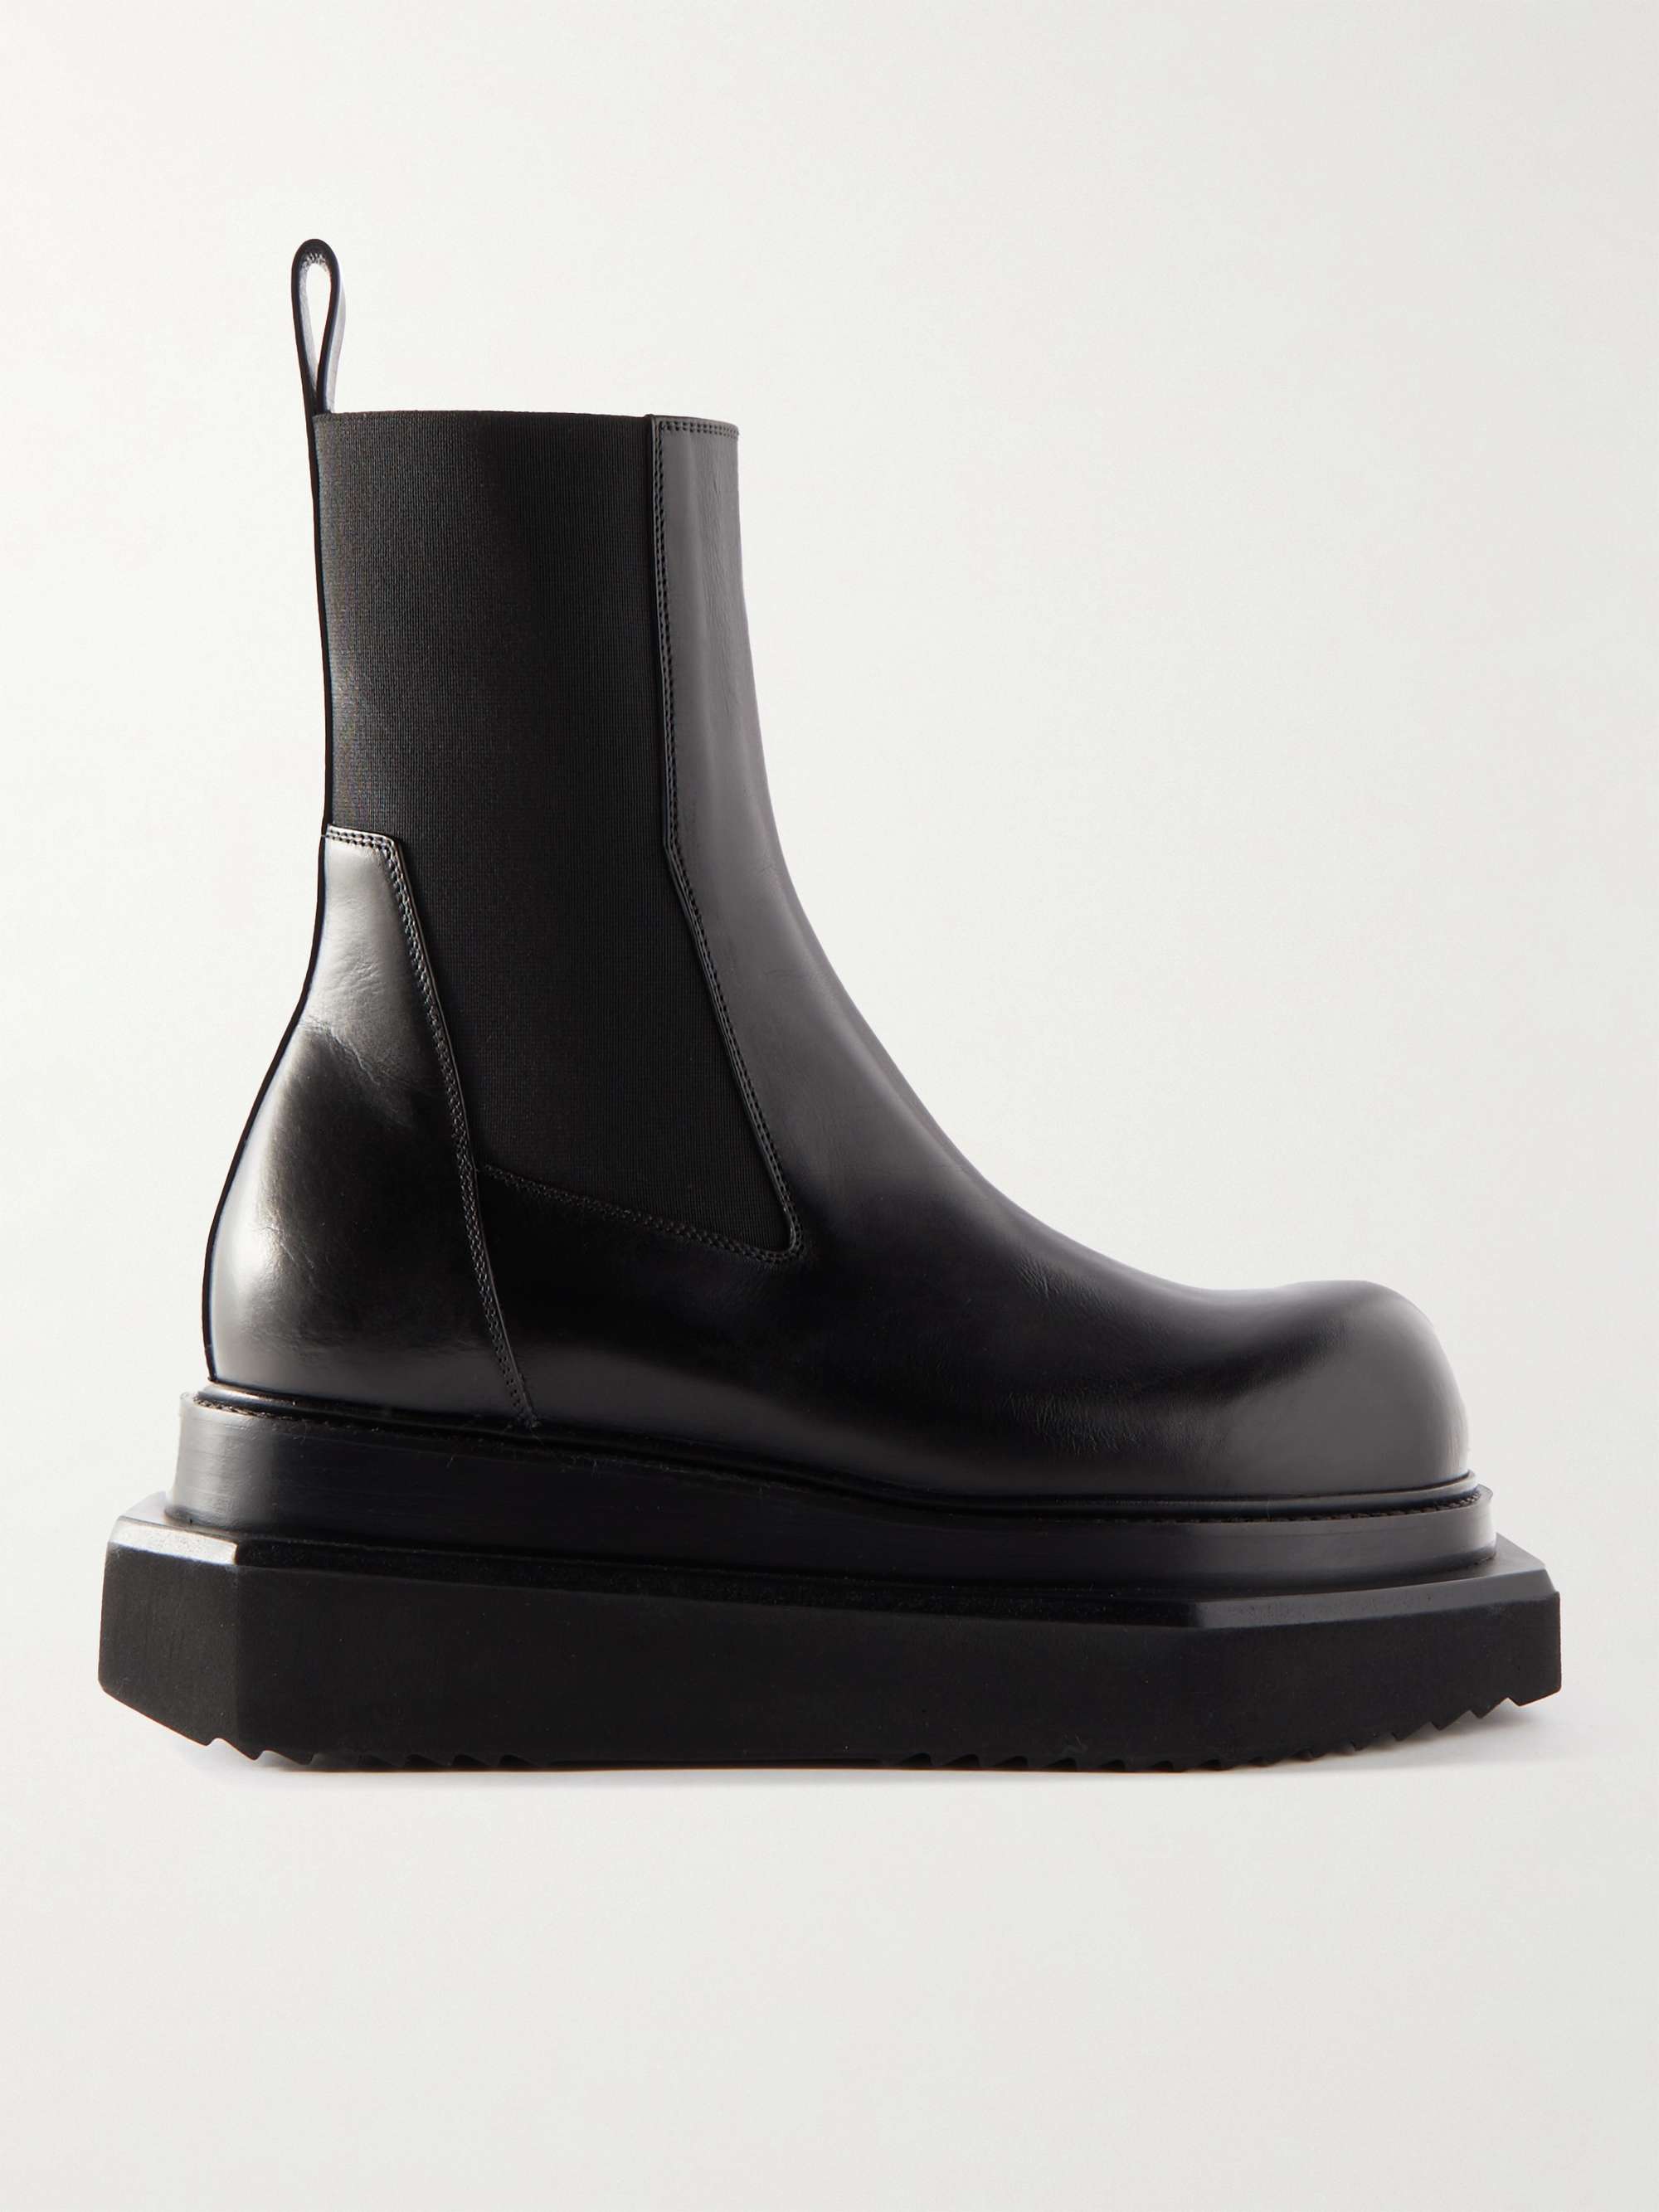 Beatle Turbo Cyclops Leather Chelsea Boots